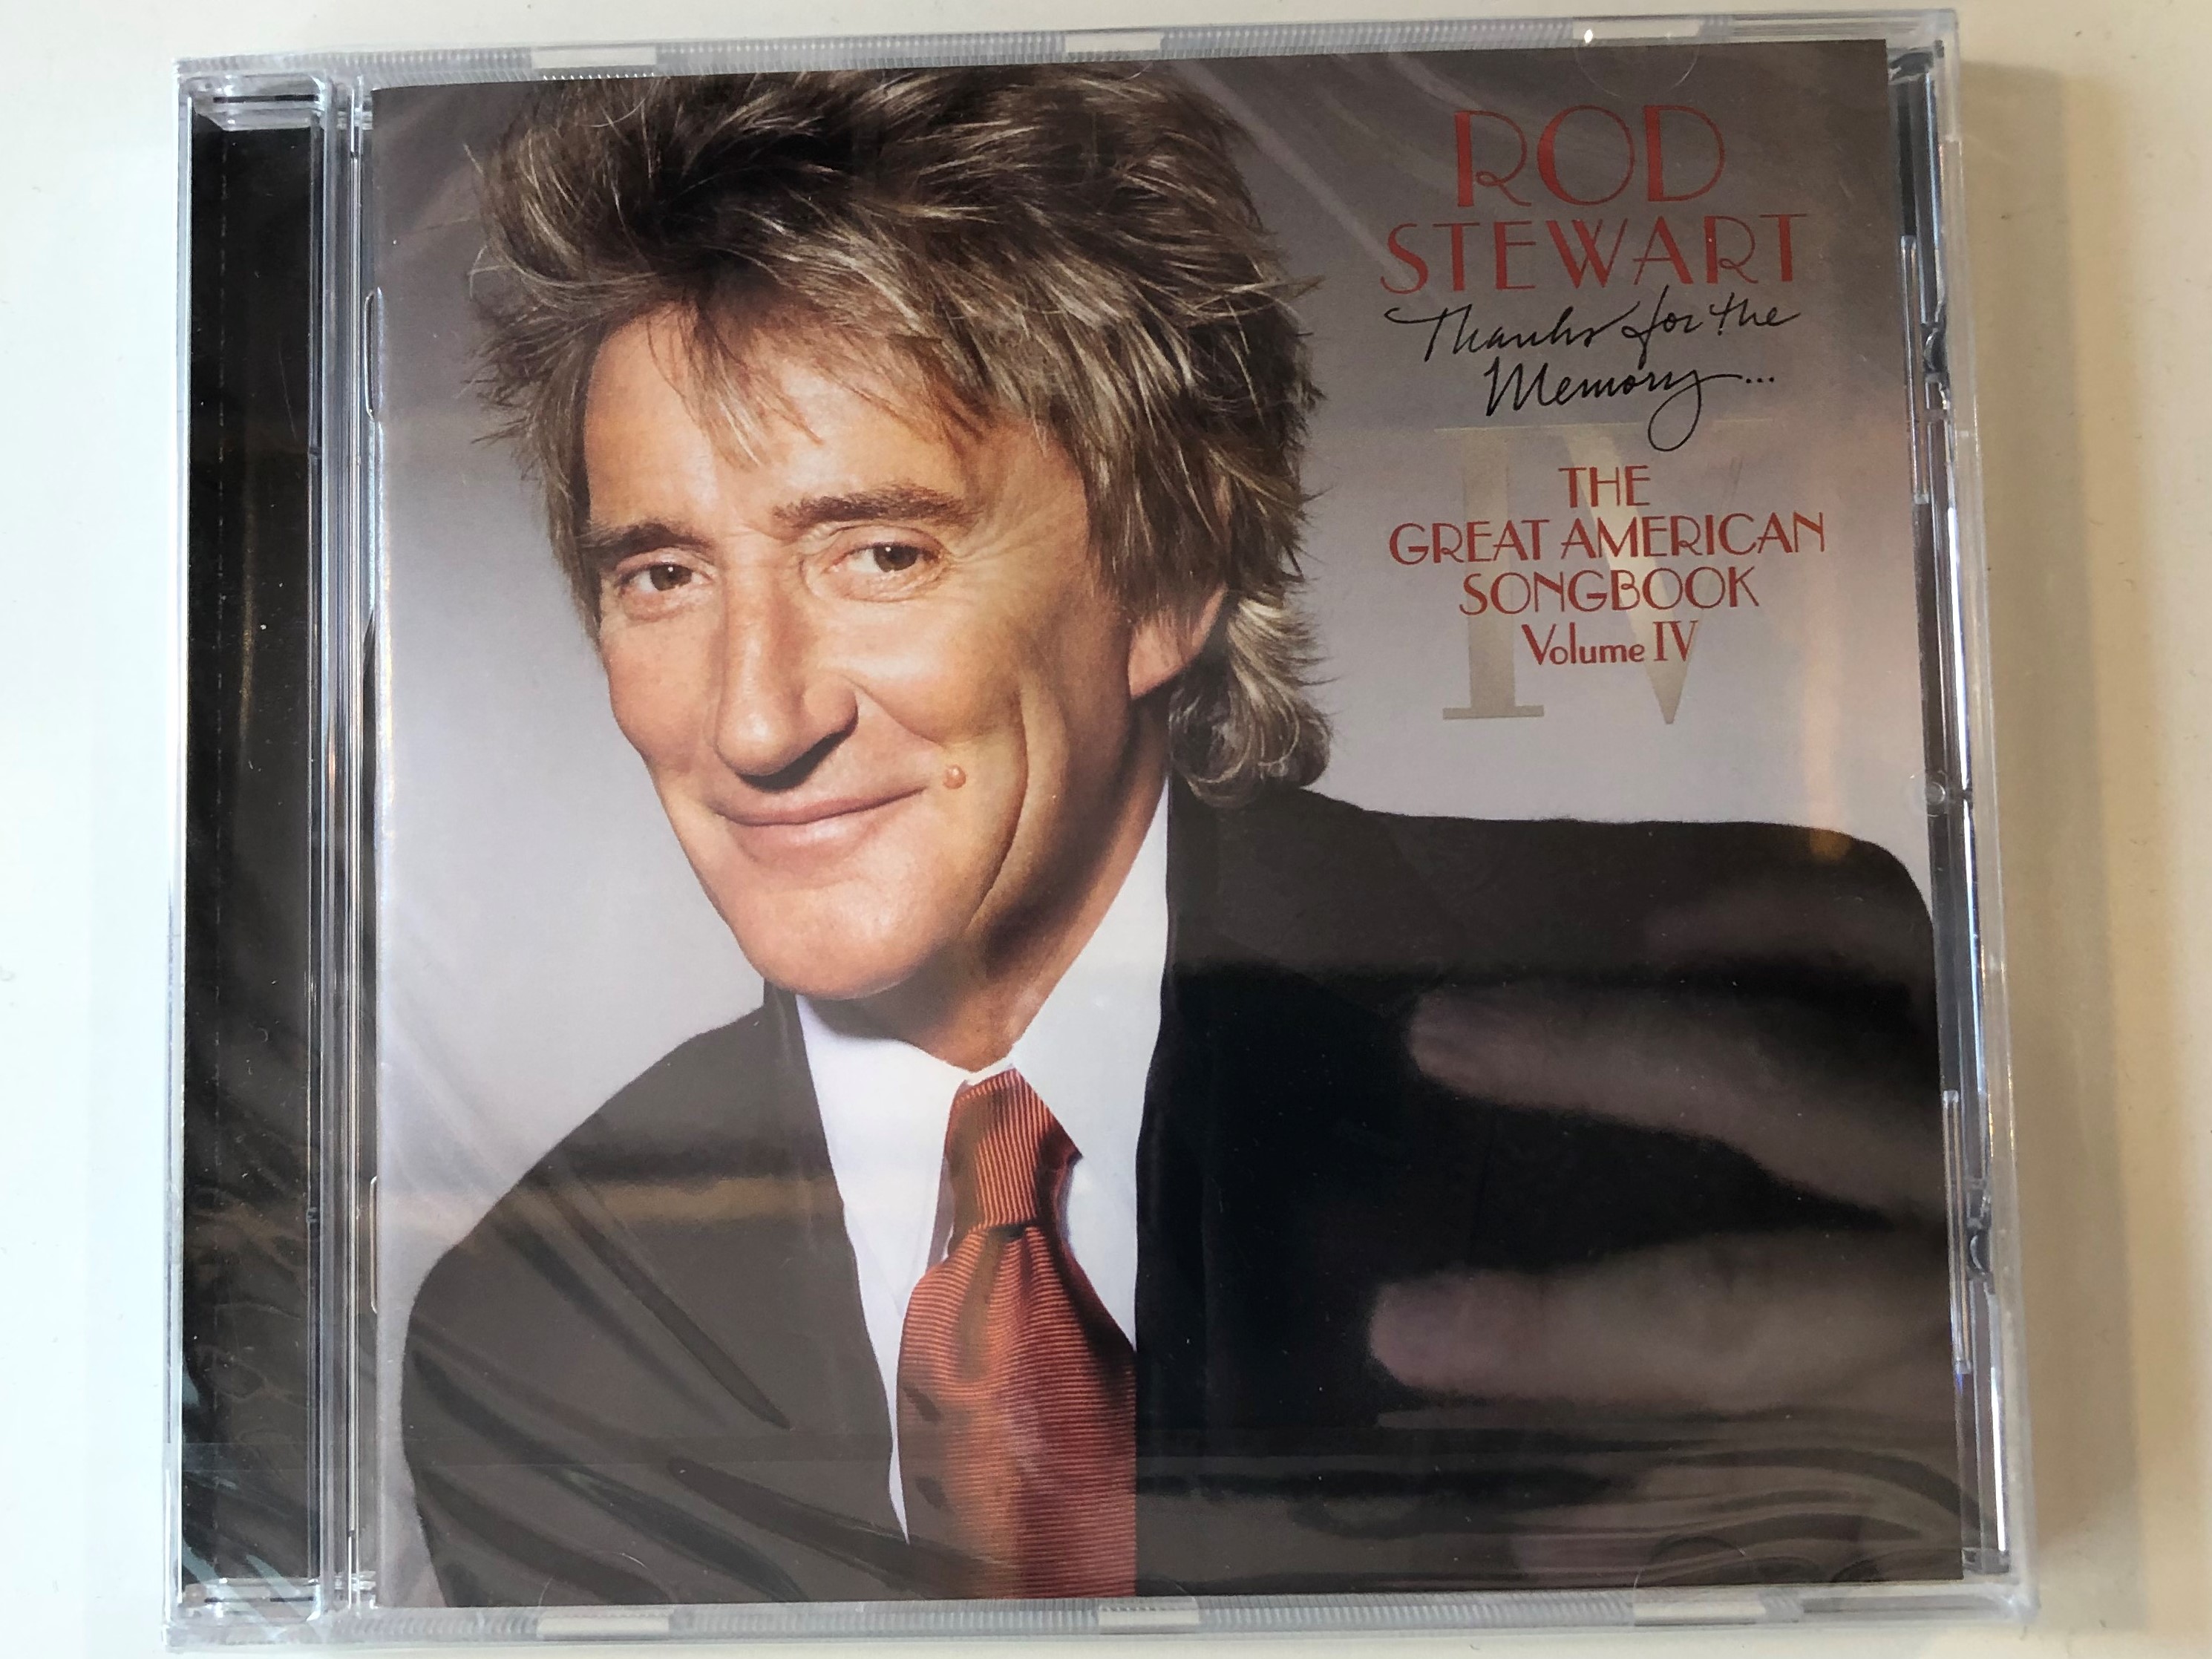 rod-stewart-thanks-for-the-memory...-the-great-american-songbook-volume-iv-j-records-audio-cd-2005-82876-71810-2-1-.jpg